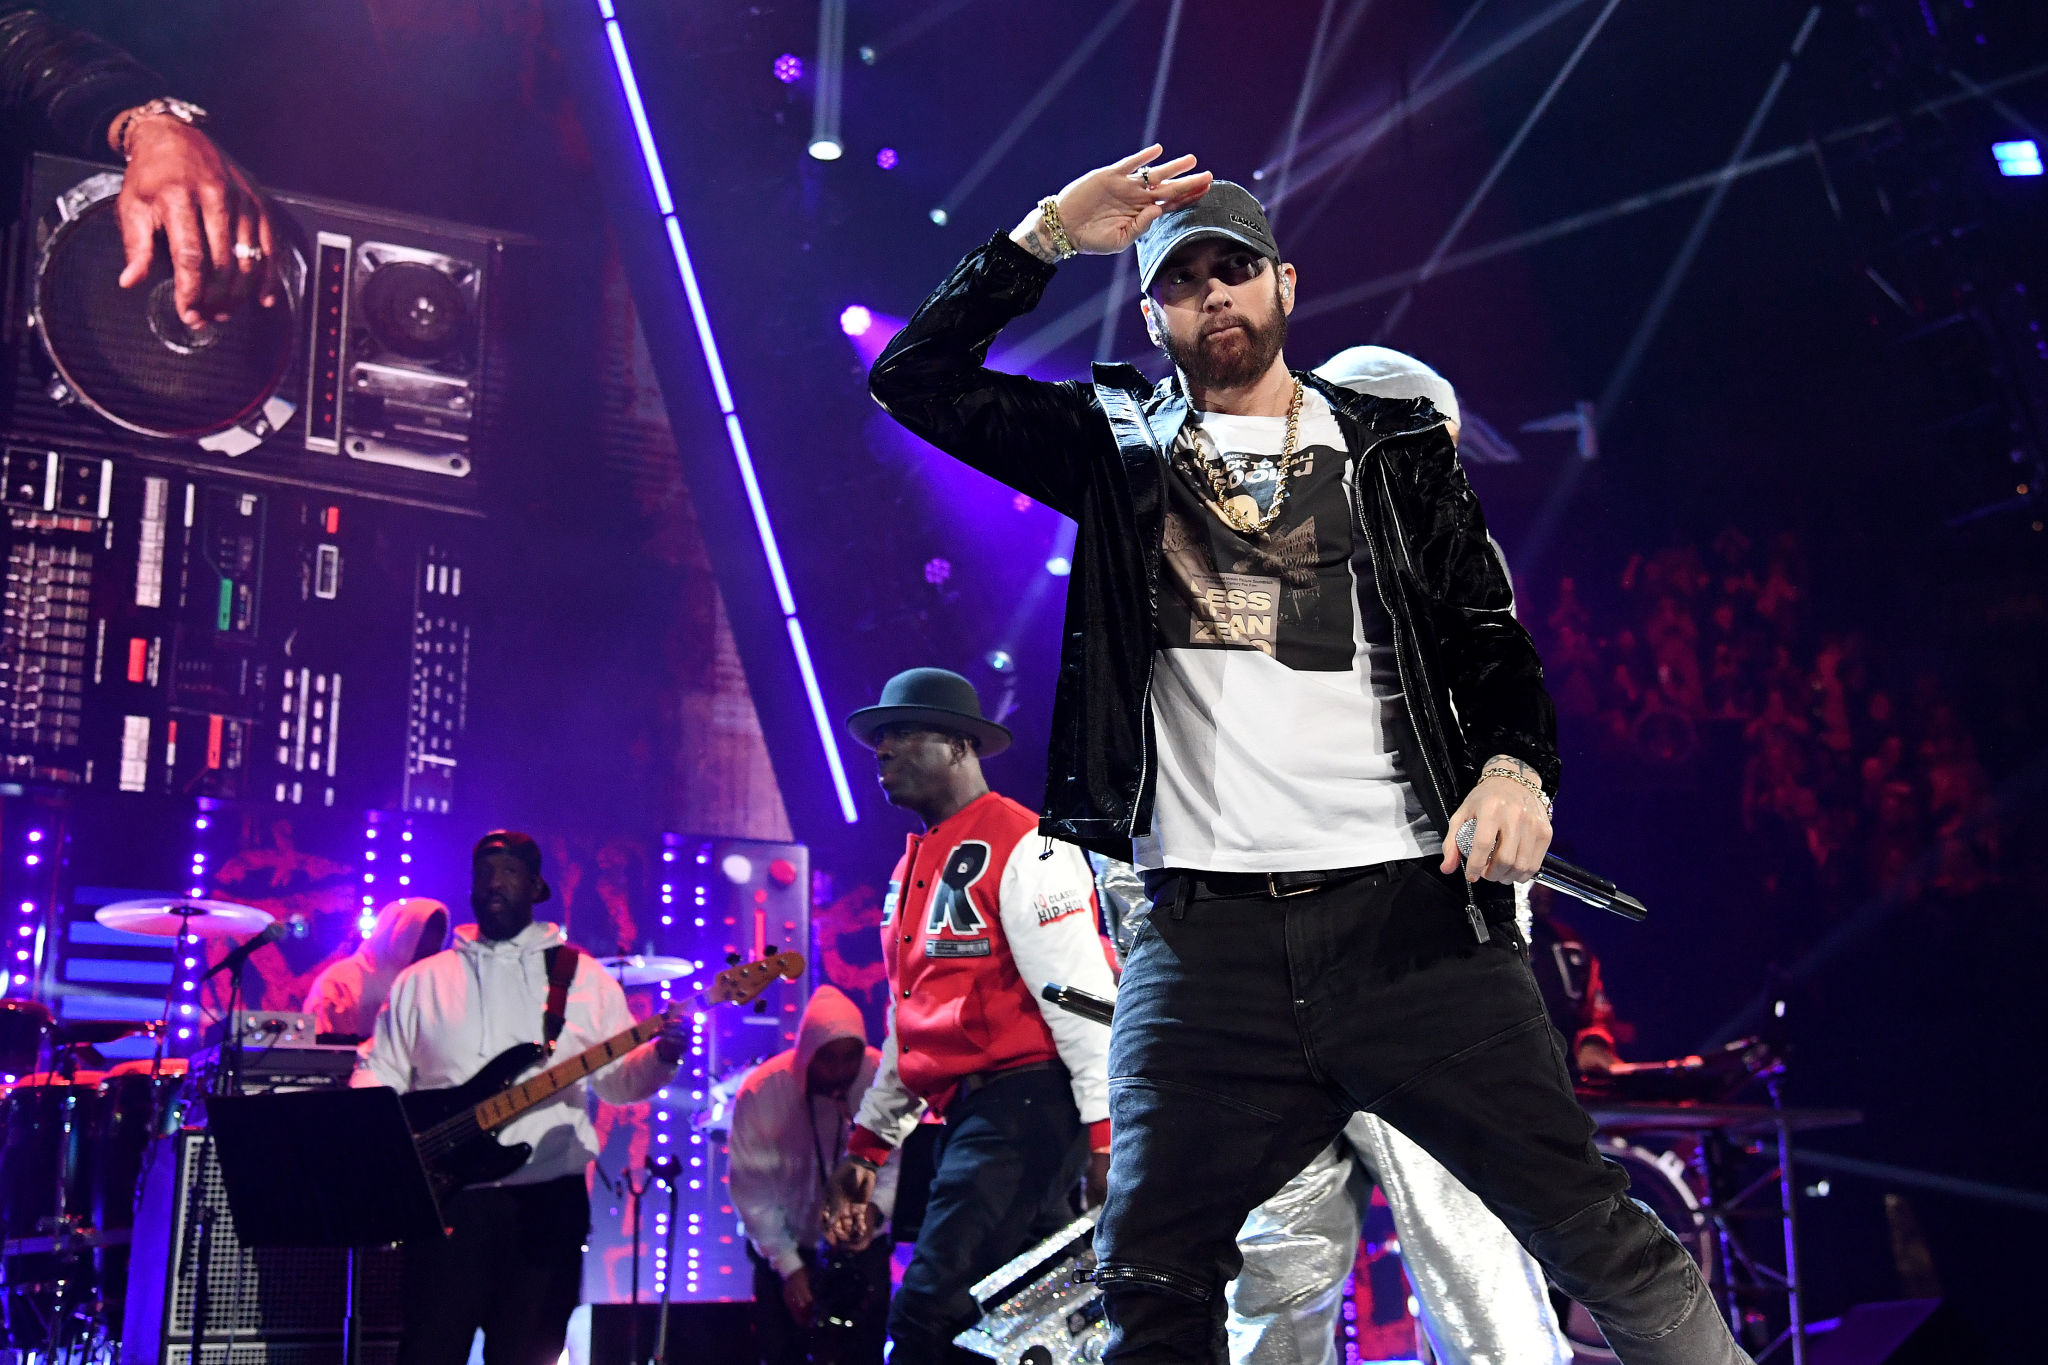 CLEVELAND, OHIO - OCTOBER 30: Eminem performs onstage during the 36th Annual Rock & Roll Hall Of Fame Induction Ceremony at Rocket Mortgage Fieldhouse on October 30, 2021 in Cleveland, Ohio. (Photo by Kevin Mazur/Getty Images for The Rock and Roll Hall of Fame )